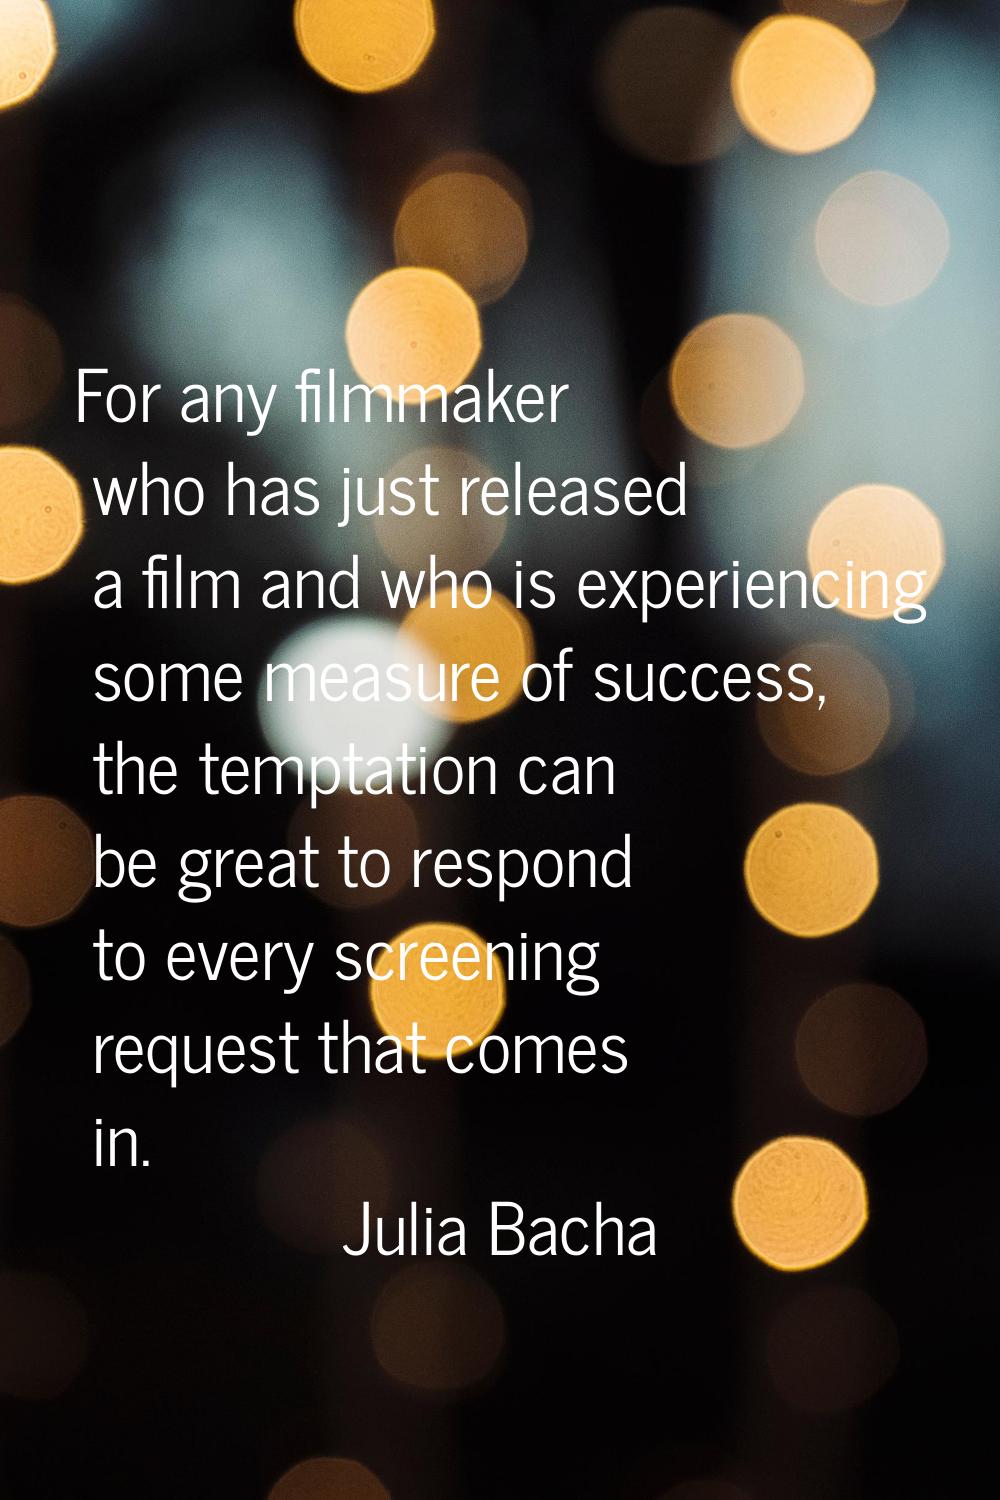 For any filmmaker who has just released a film and who is experiencing some measure of success, the